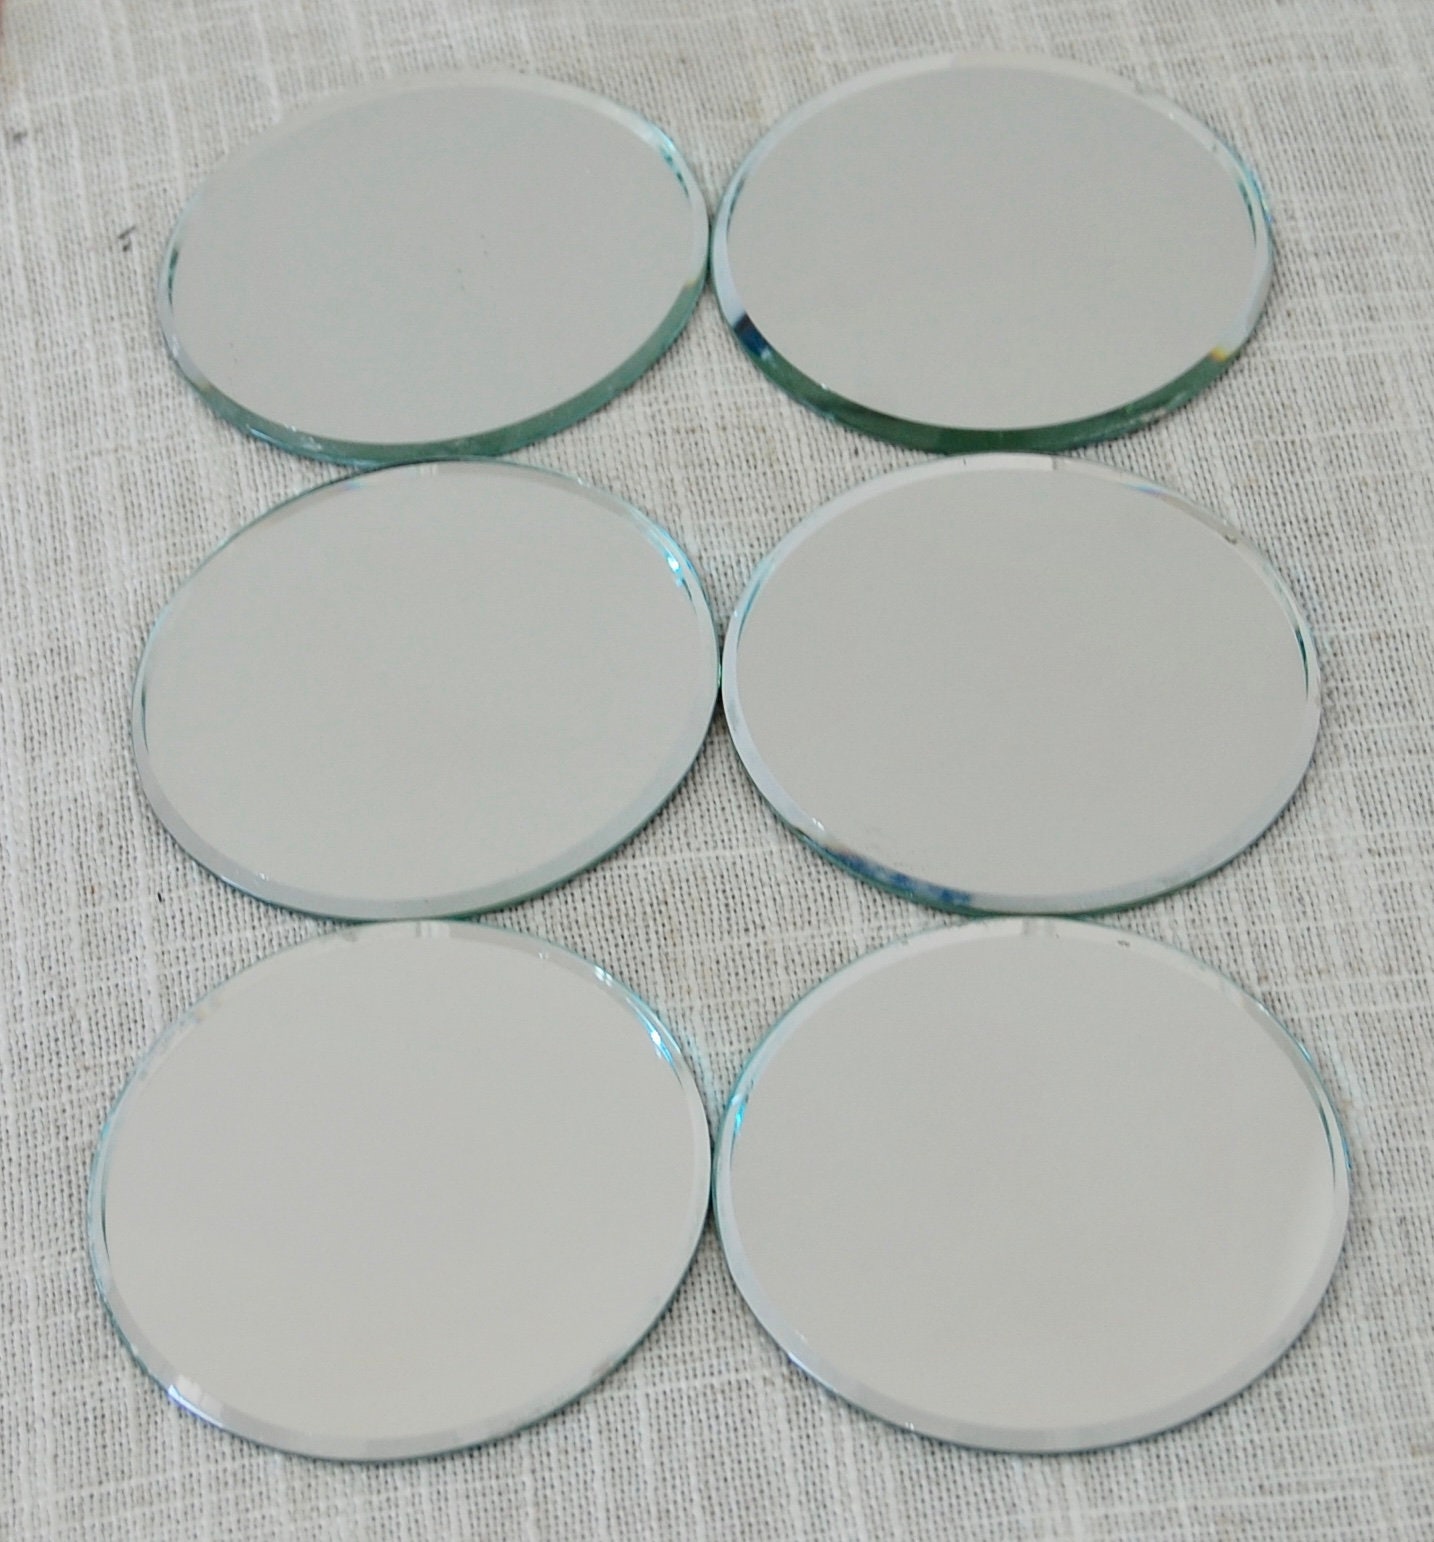 MIRROR Strips of Glass (B14-mir) 1-1/2 Pounds for Stained Glass / Mosaics /  Art Mirror Project